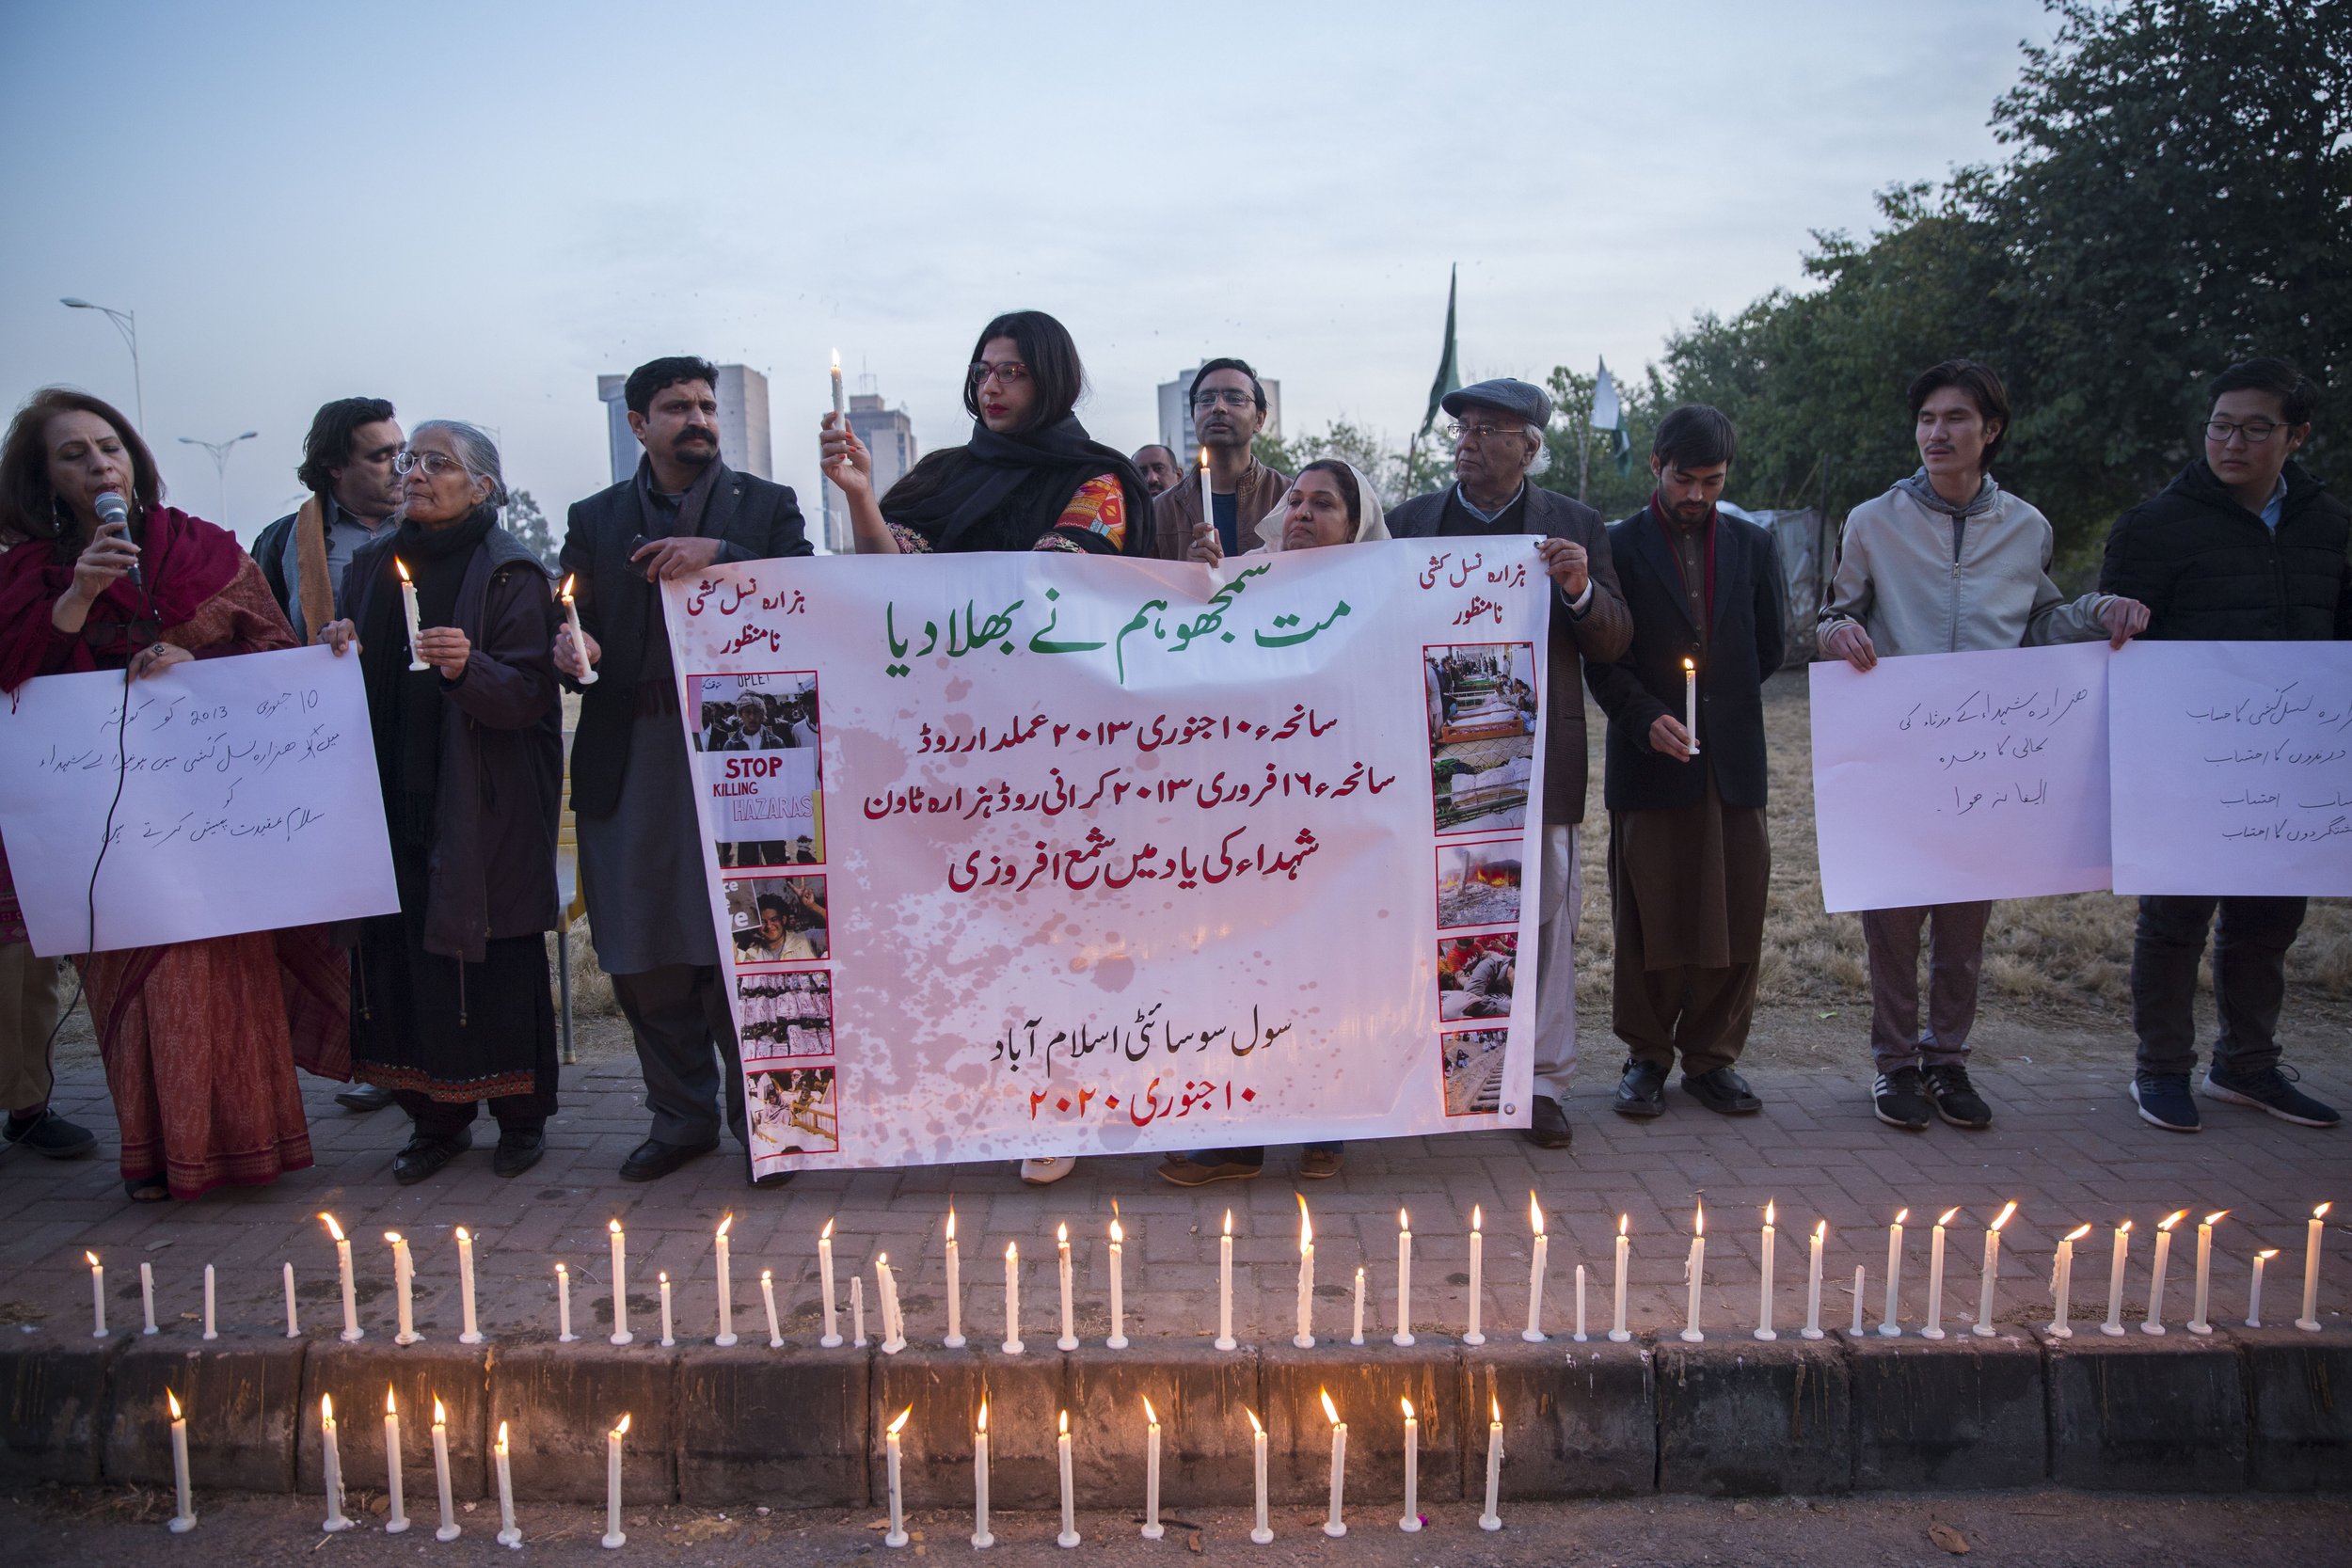  The annual observance is held to bring attention to the ongoing targeted killings of Hazaras in Quetta. 